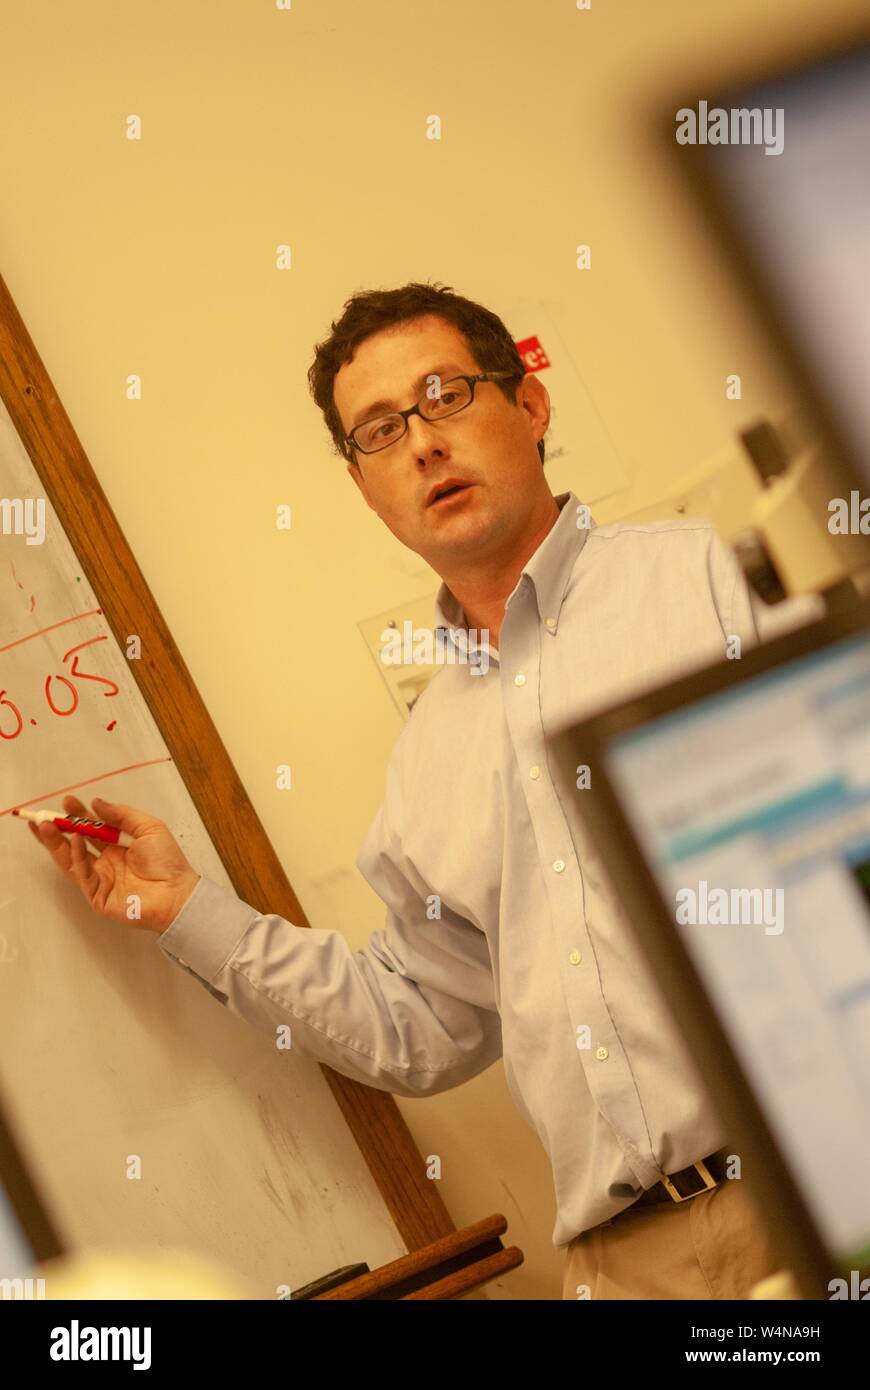 Angled mid-shot of Robert Lessick, Program Director for the Master of Science in Bioinformatics, using a whiteboard at the Johns Hopkins University, Baltimore, Maryland, February 26, 2007. From the Homewood Photography Collection. () Stock Photo